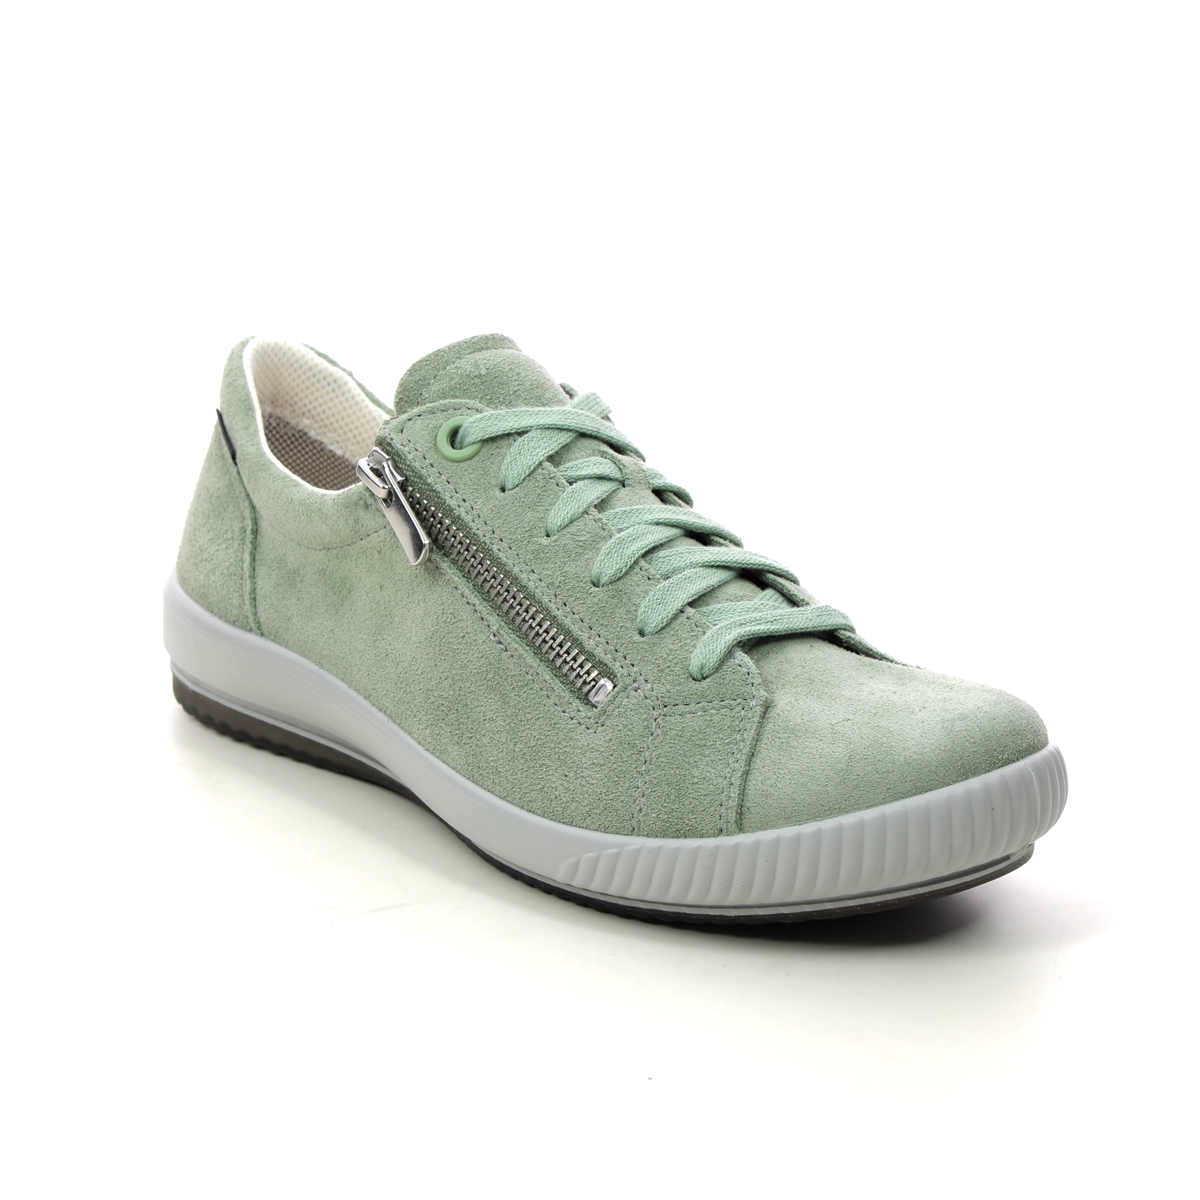 Legero Tanaro 5 Gtx Mint Suede Womens Lacing Shoes 2000219-7200 In Size 7.5 In Plain Mint Suede